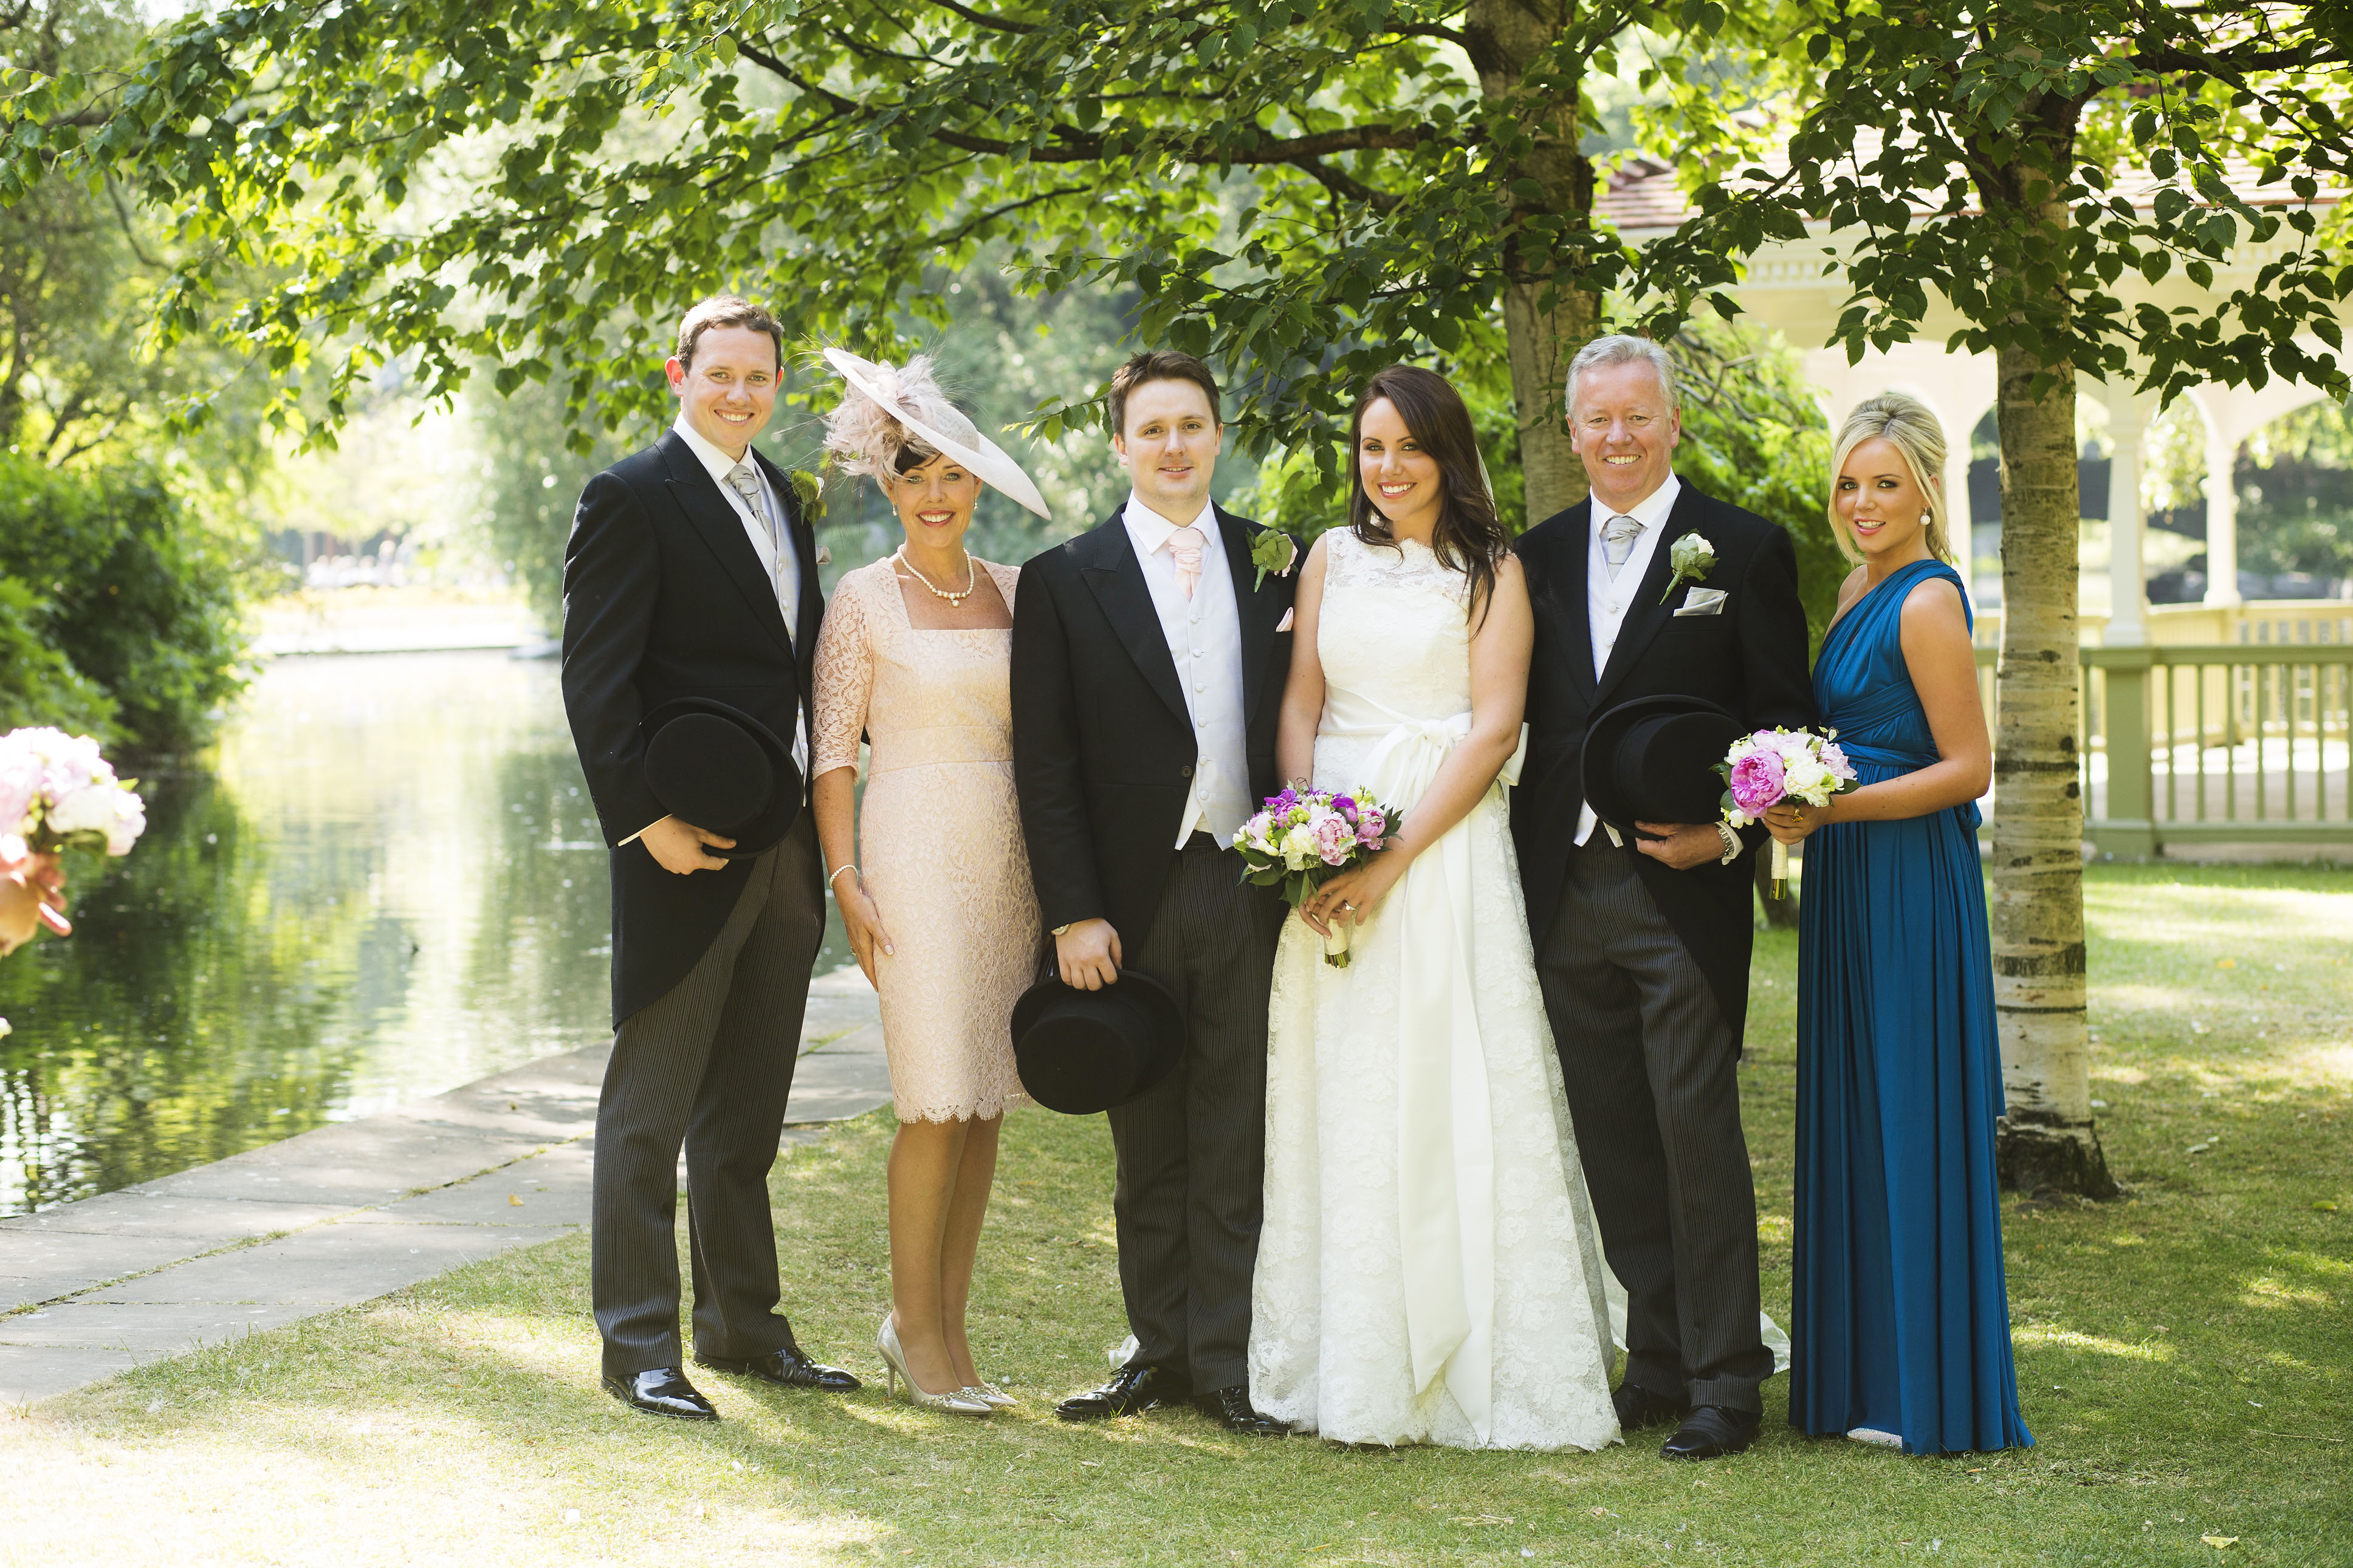 From left: Saunders’s son Colin, wife Jean, daughter Caroline with her husband George, Saunders, and daughter Hannah at Caroline’s wedding in 2013.